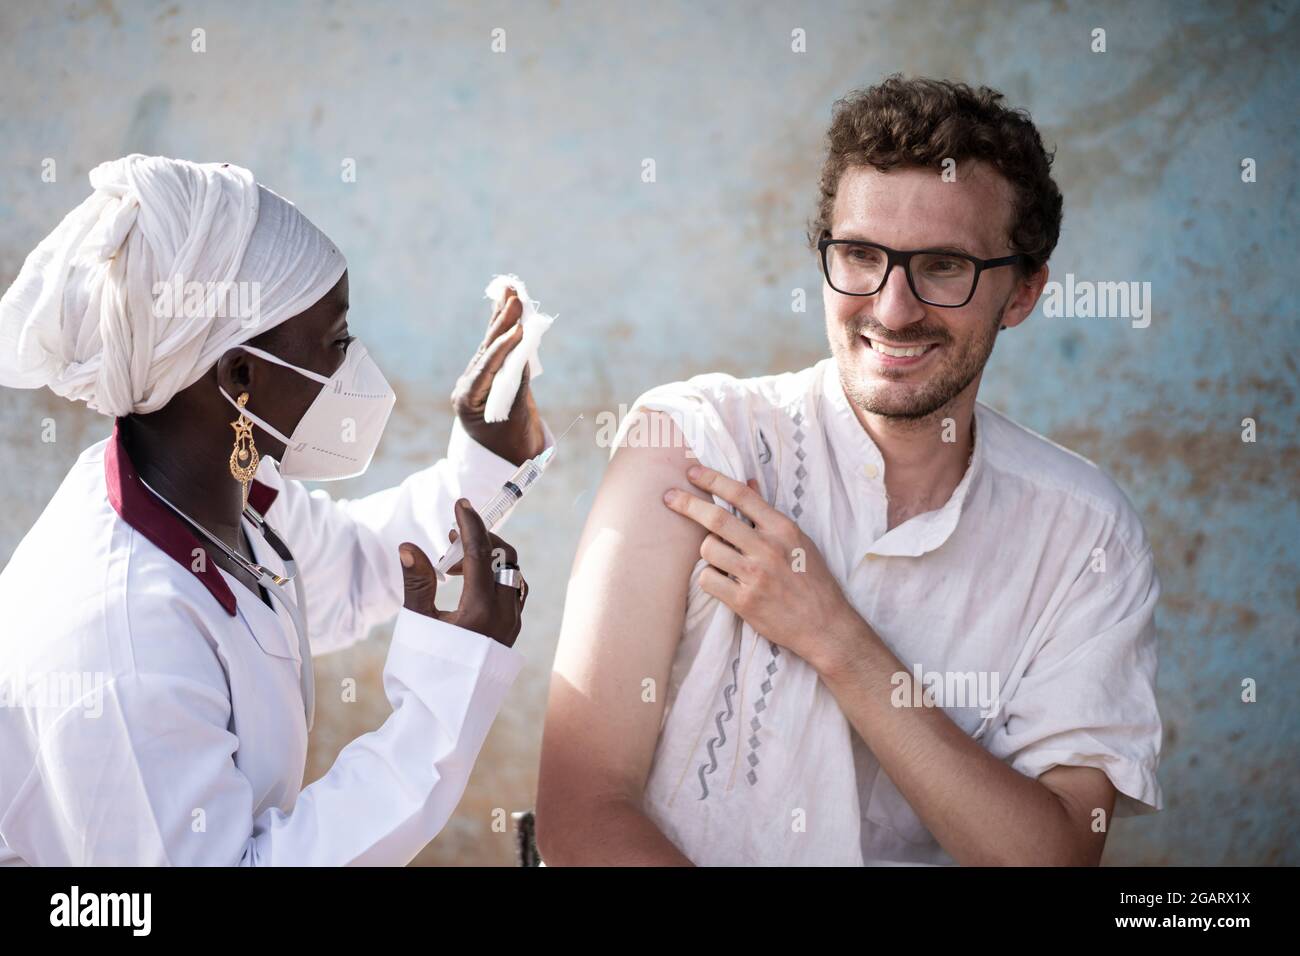 IN this image, a black nurse wearing a protective mask, with syringe and gauge in her hands is preparing to inject a booster dose of vaccine in the ar Stock Photo